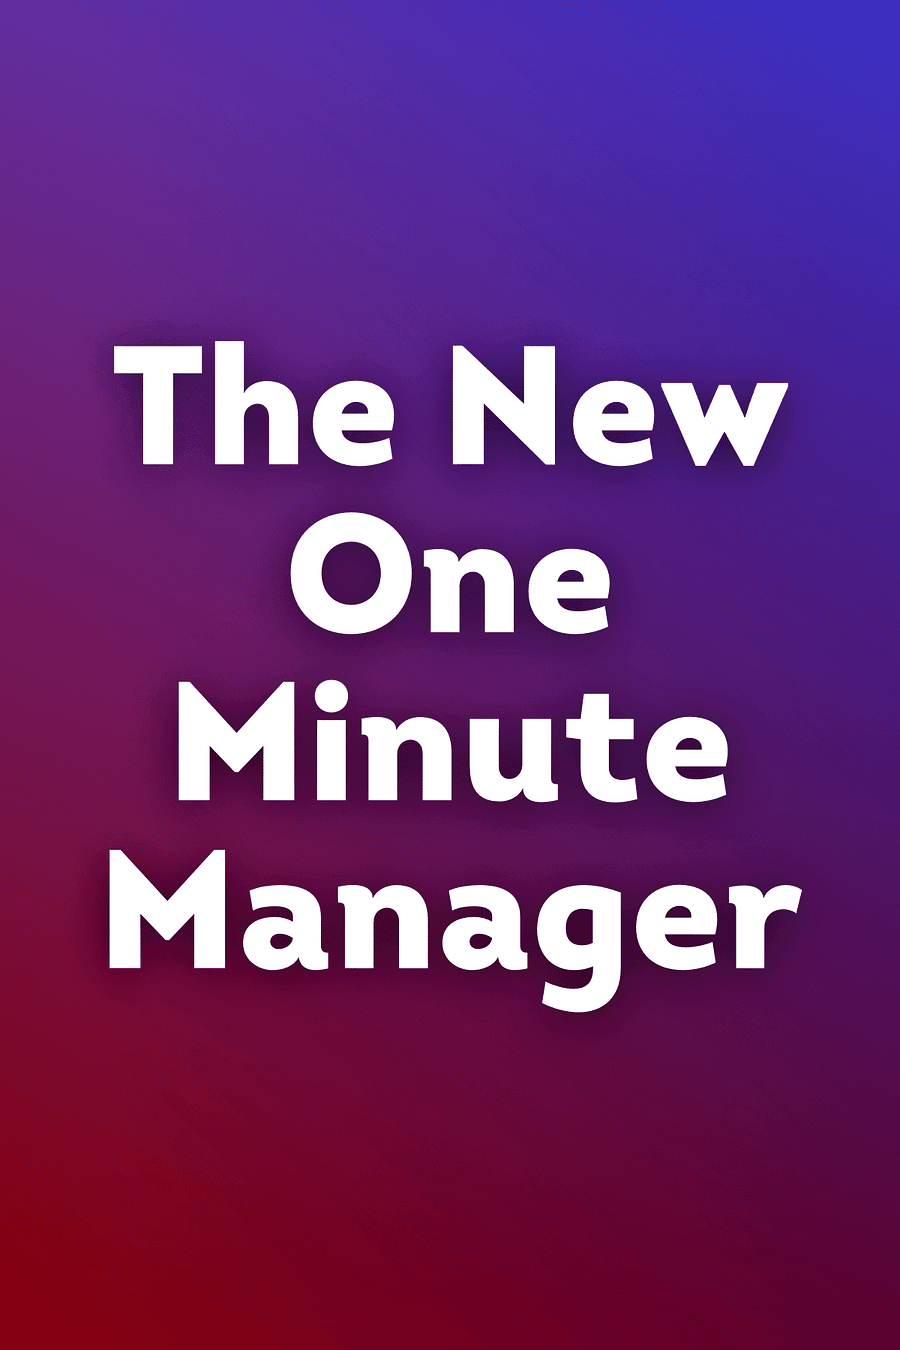 The New One Minute Manager by Ken Blanchard, Spencer Johnson - Book Summary